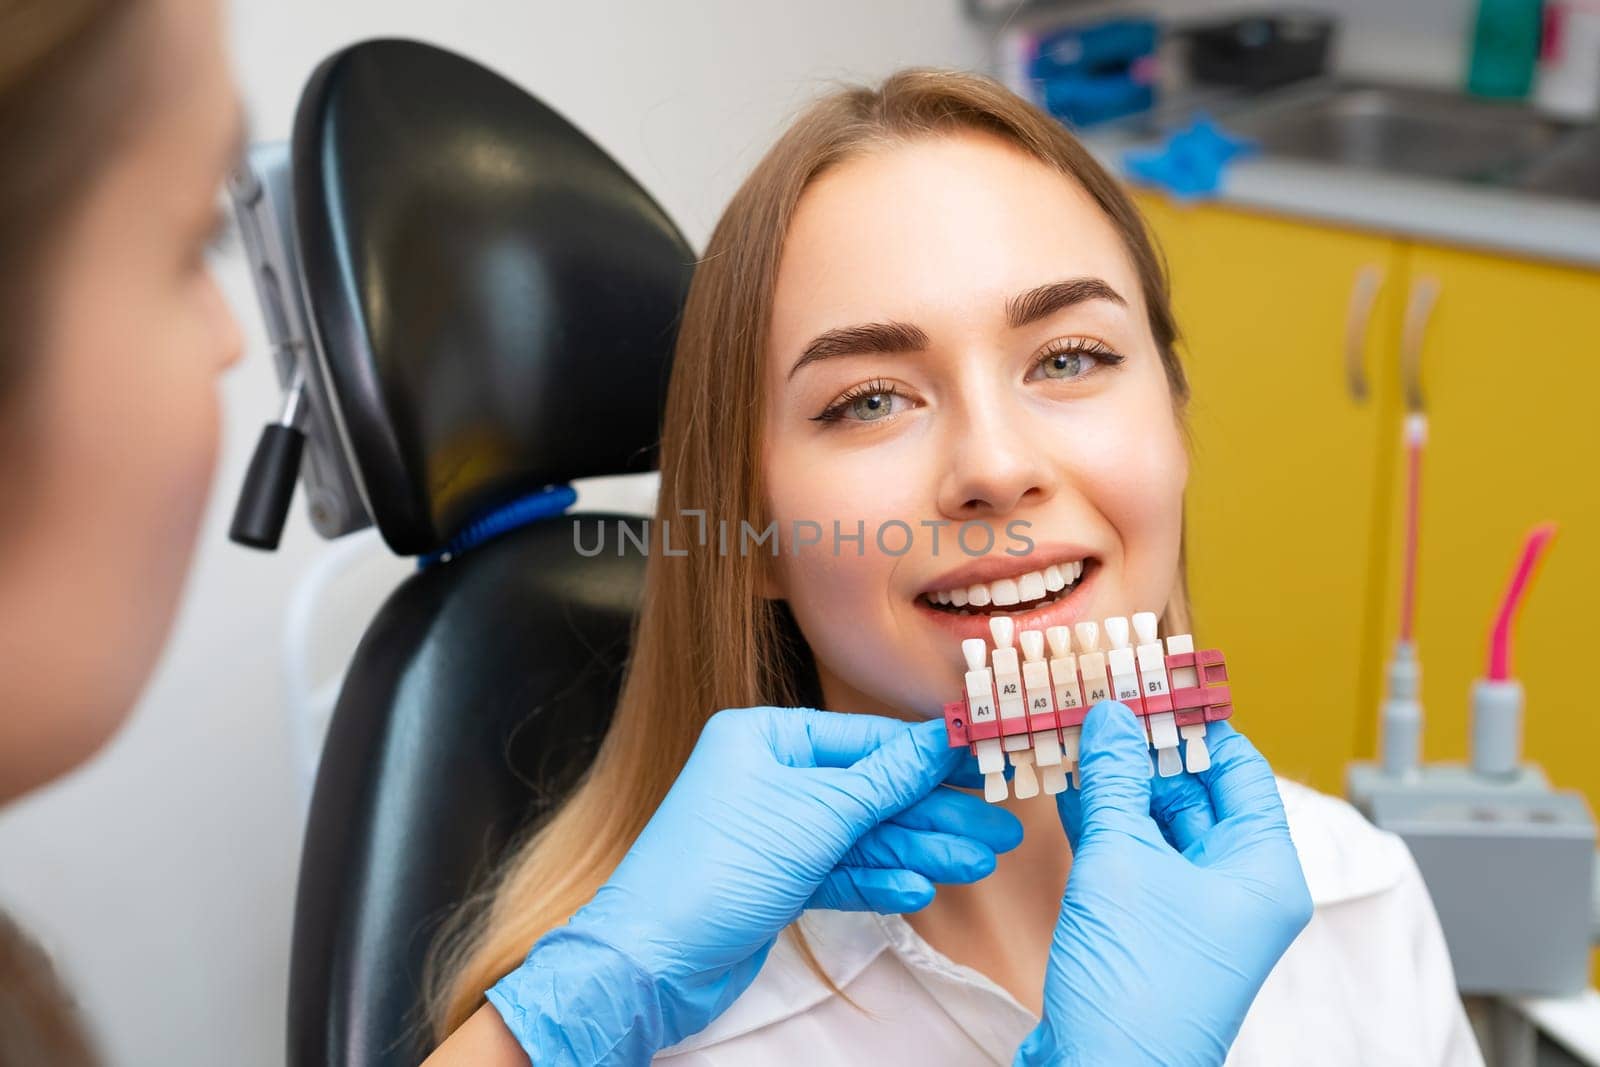 Dentist uses a set of implants with various shades of tone for whitening of teeth to young woman